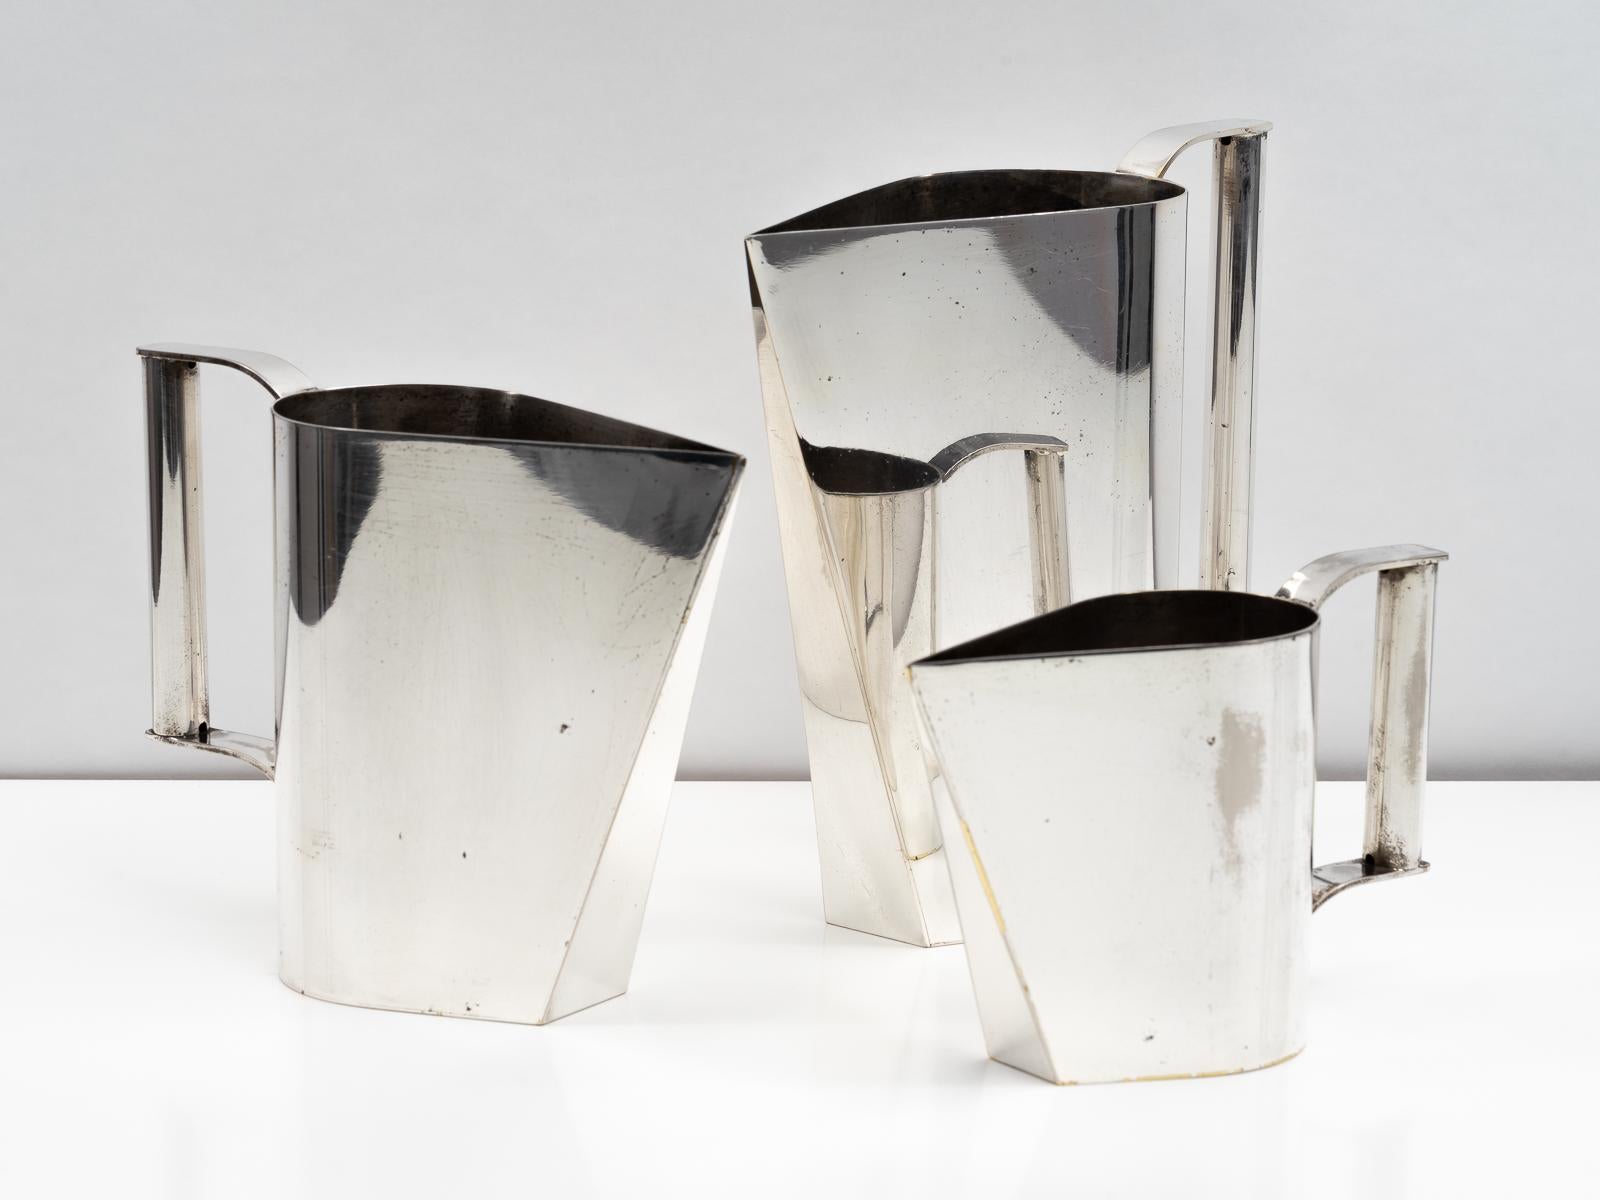 Set of 3 Silver Plated Modernist Pitchers Attributed to Cini Boeri, circa 1975 For Sale 4